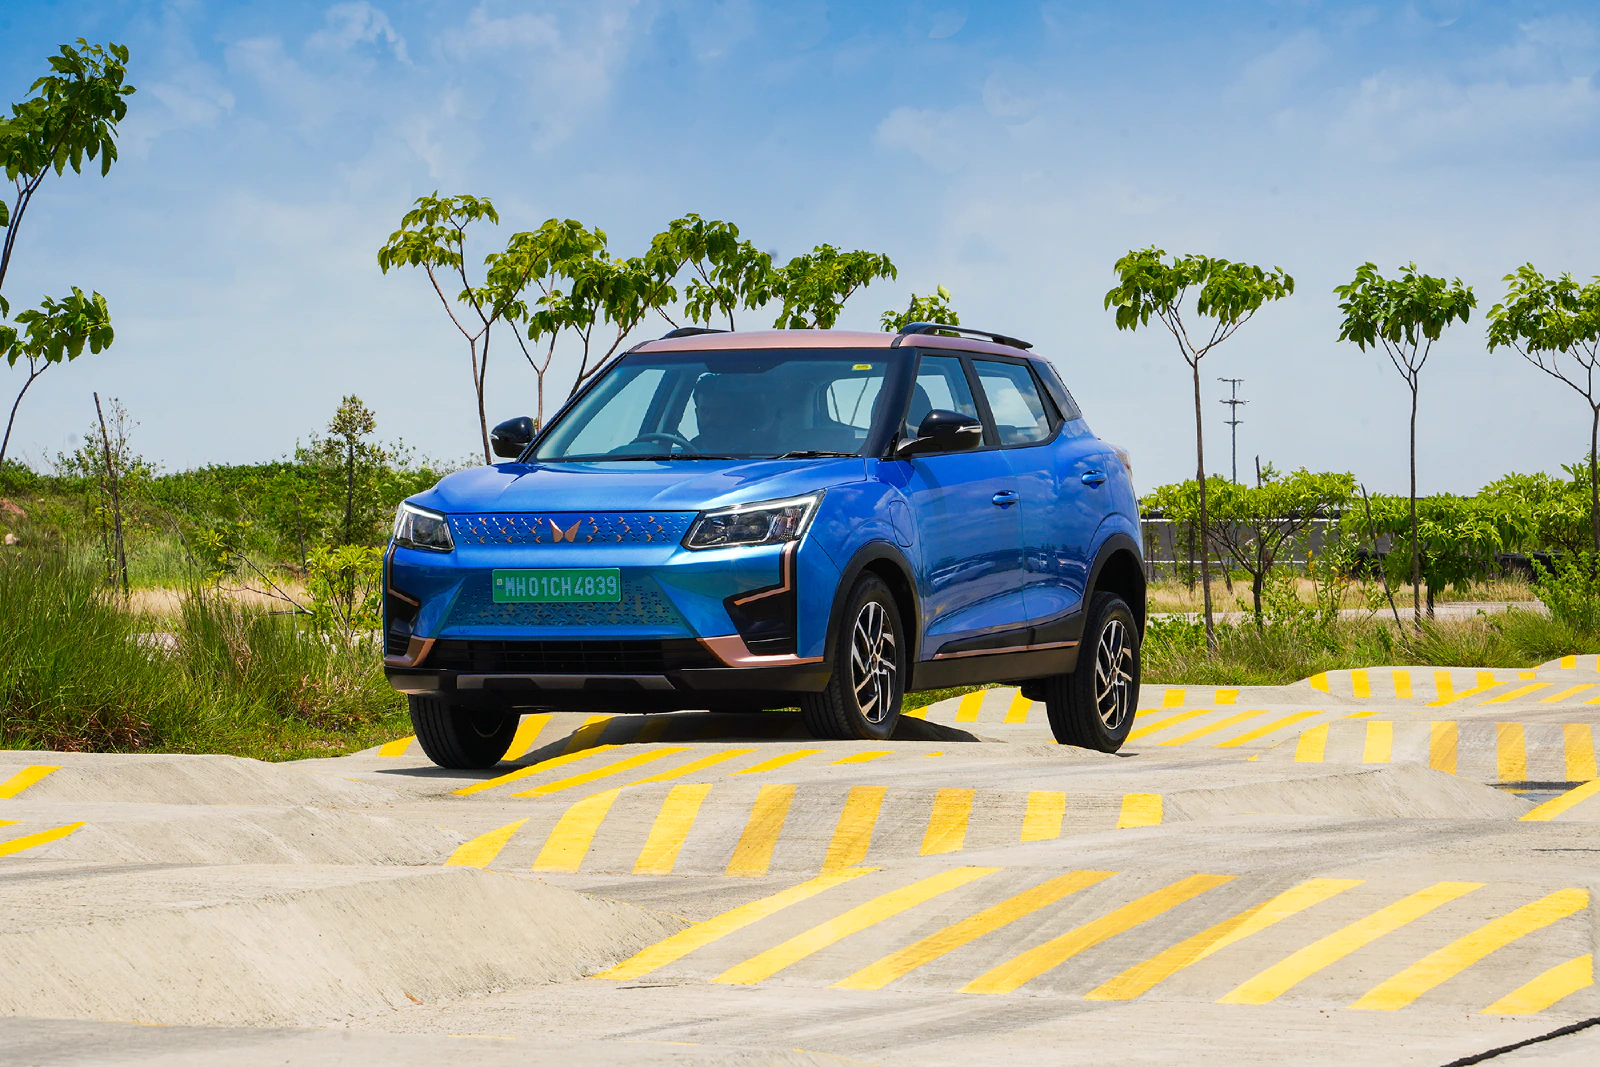 XUV400 at a test track